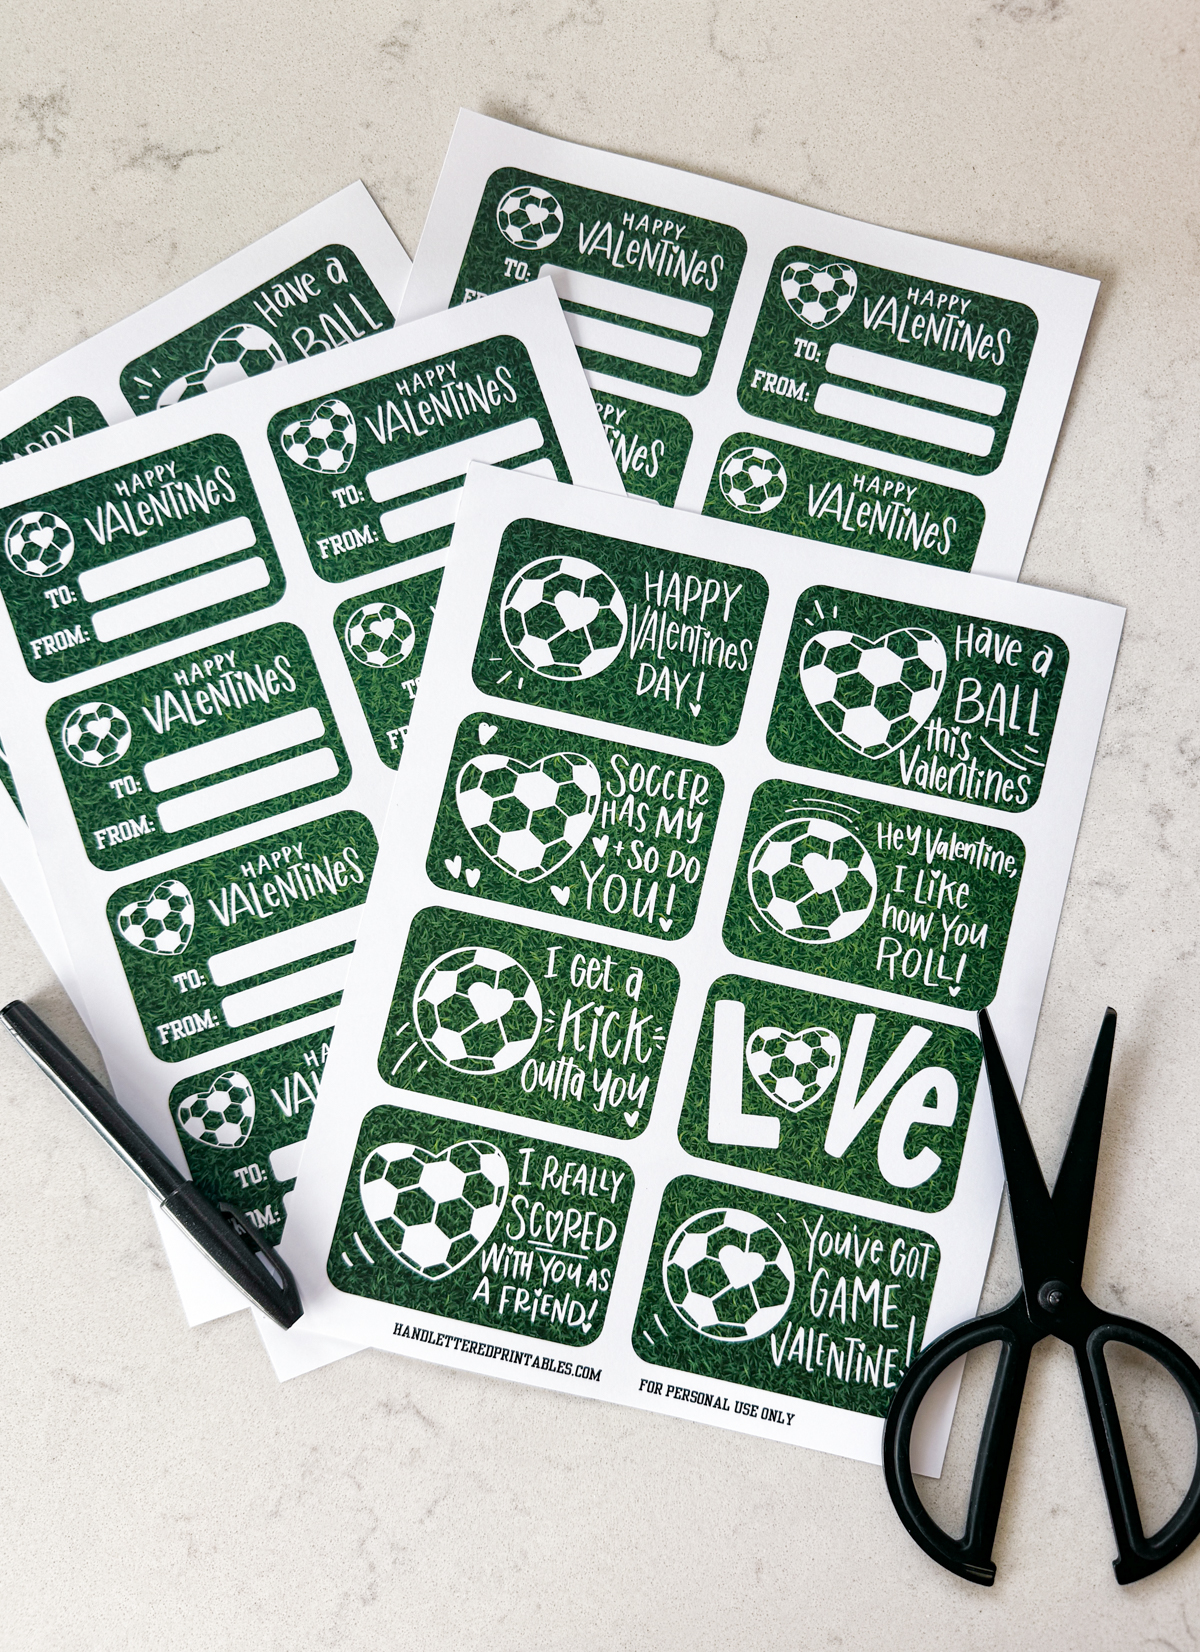 image shows soccer themed valentines printed in full sheets, ready to be cut to size valentines have a heart shaped soccer ball and a soccer ball with a heart on it and a grass background. valentines puns and sentiments include: happy valentines day, have a ball this valentines, hey valentine i like how you roll, soccer has my heart and so do you, i get a kick outta you, love (with a heart soccerball as the o), you've got game valentine, and i really scored with you as a friend reverse reads 'happy valentines' with room for to and from names. soccer/ american football